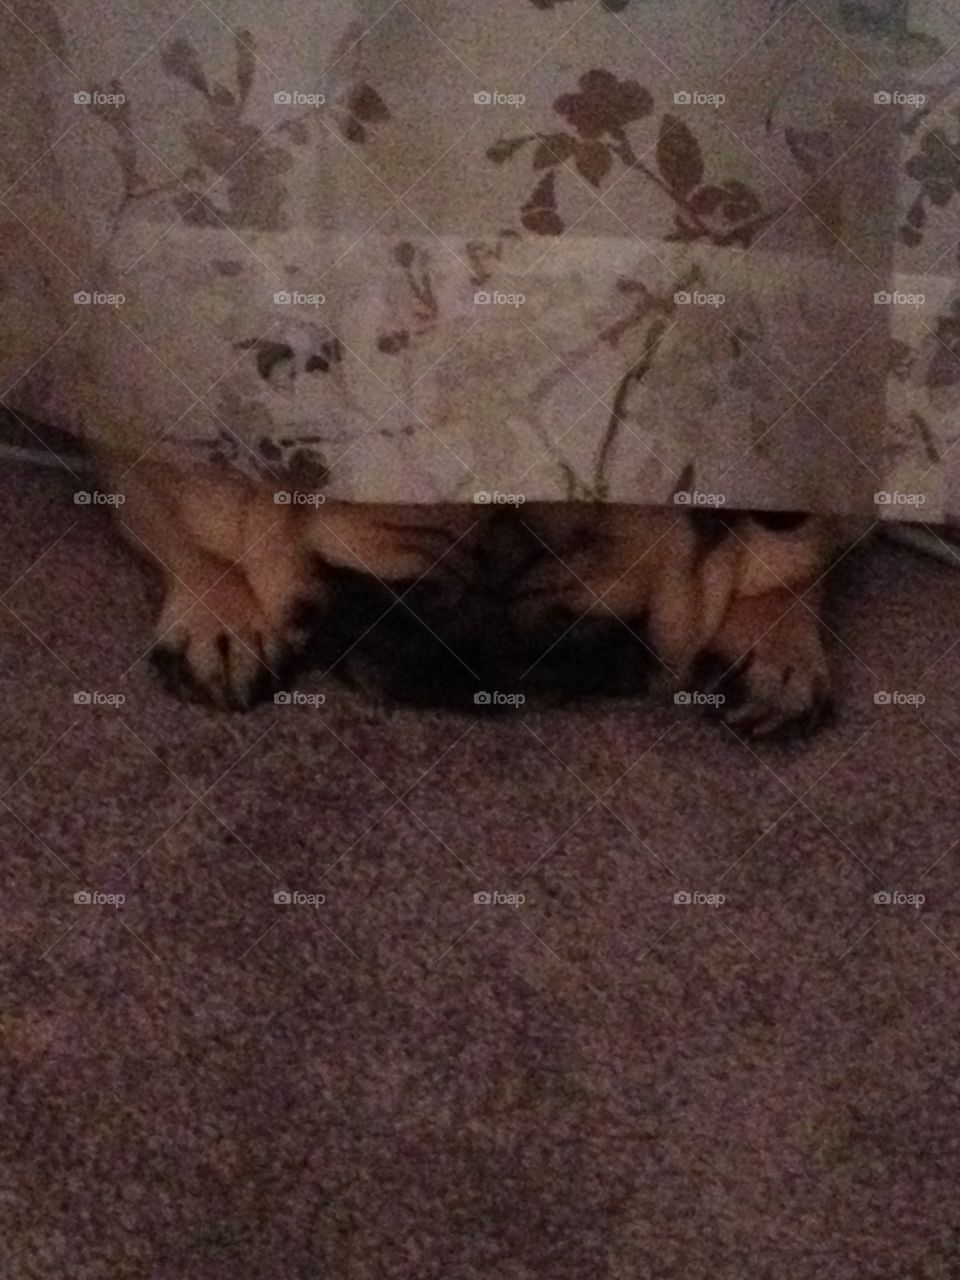 Napping under the curtain